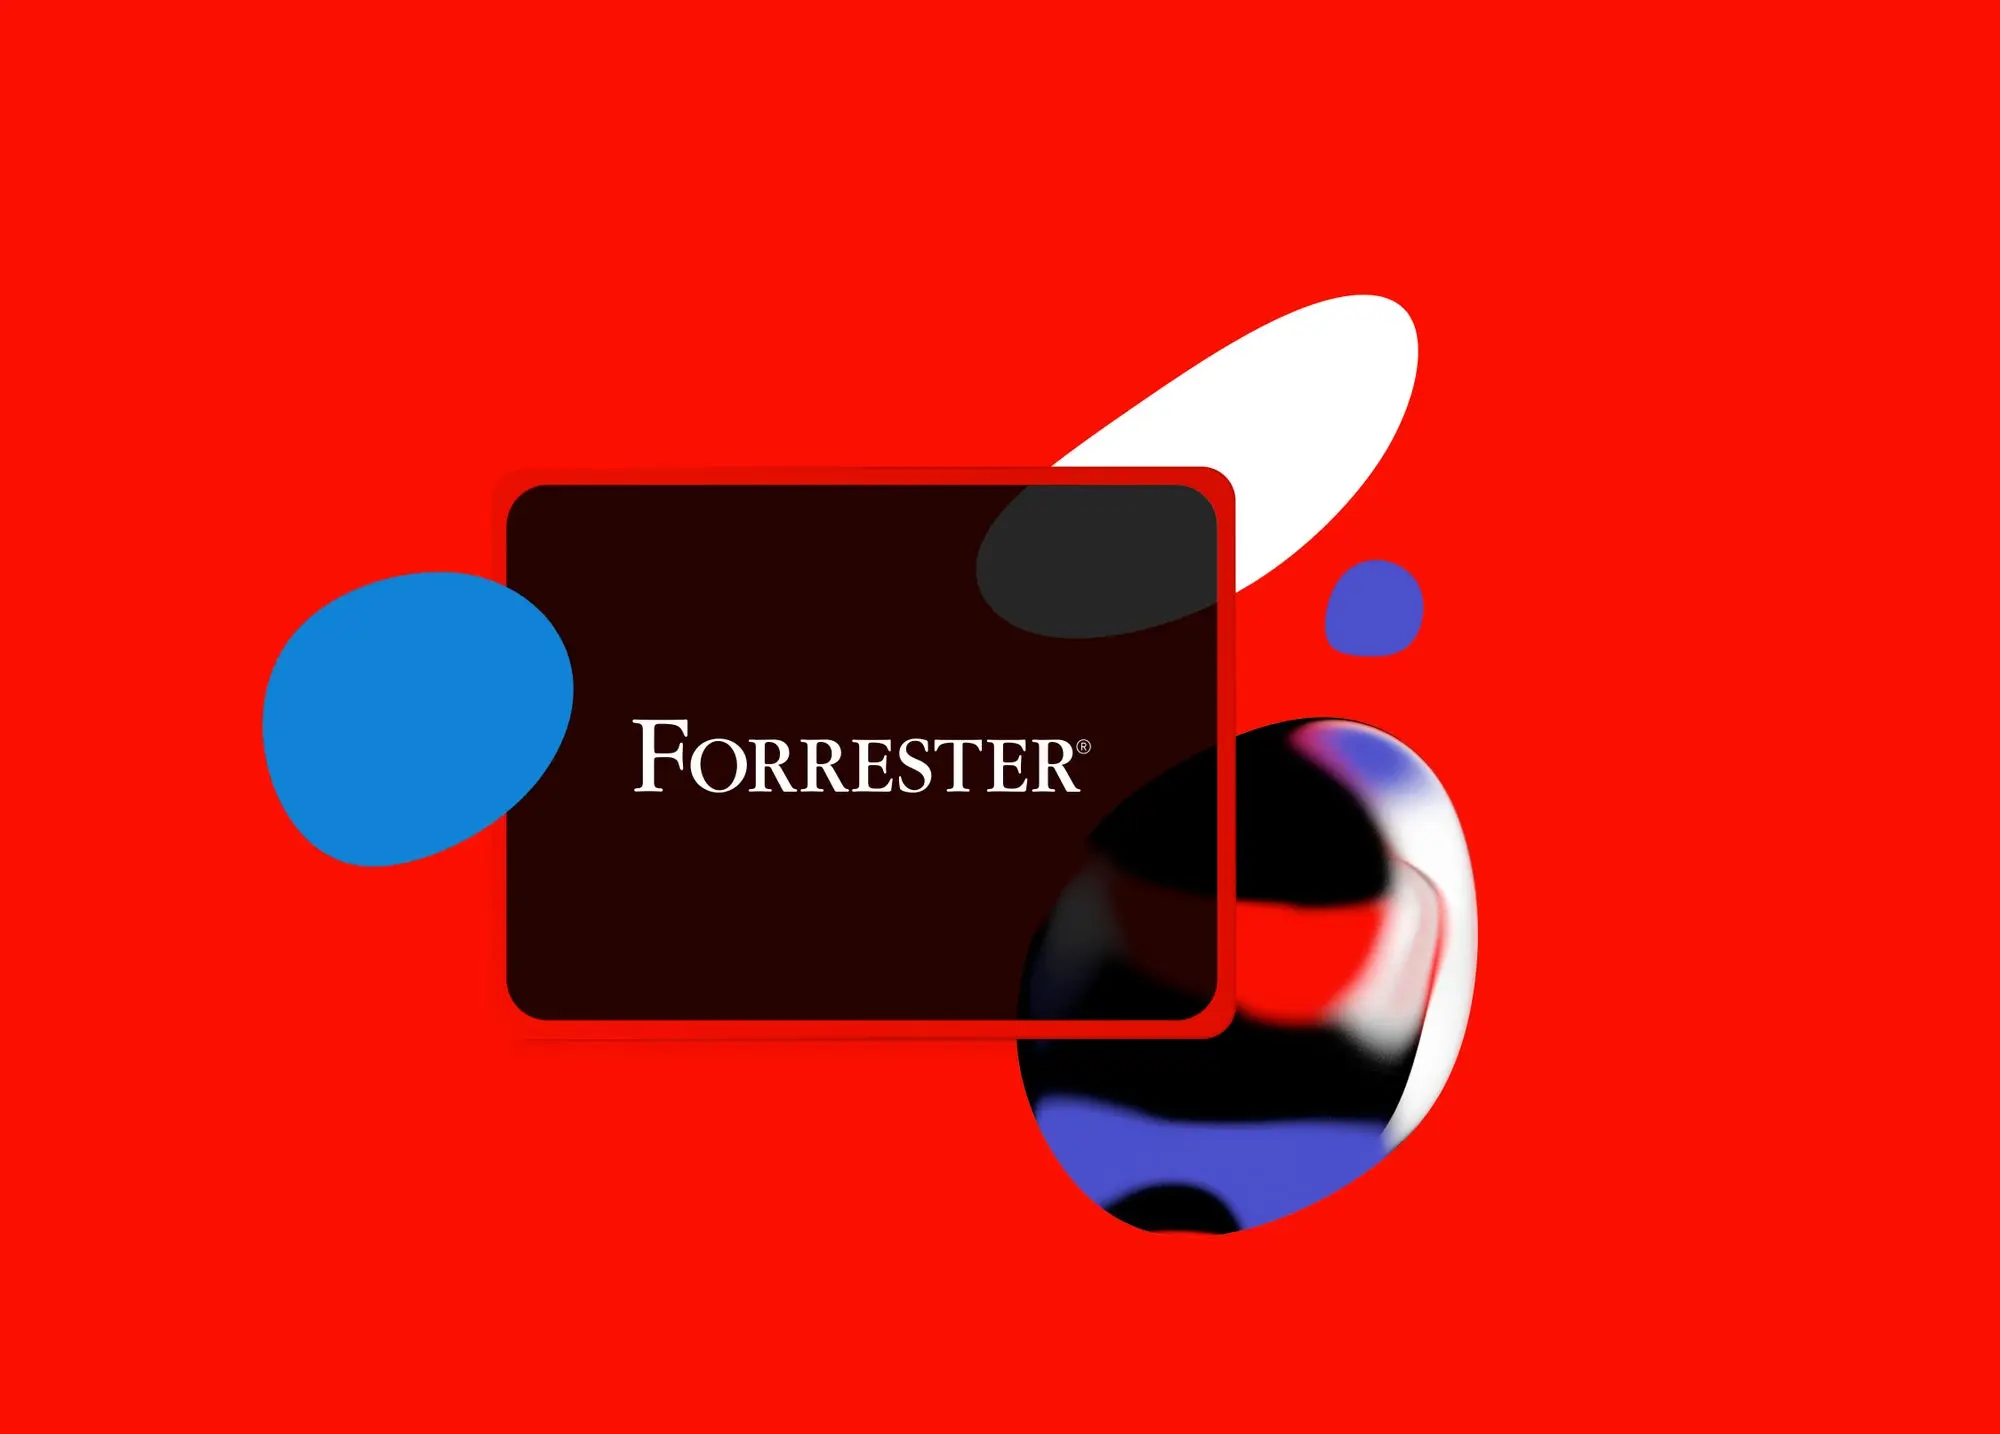 Forrester over abstract image.
